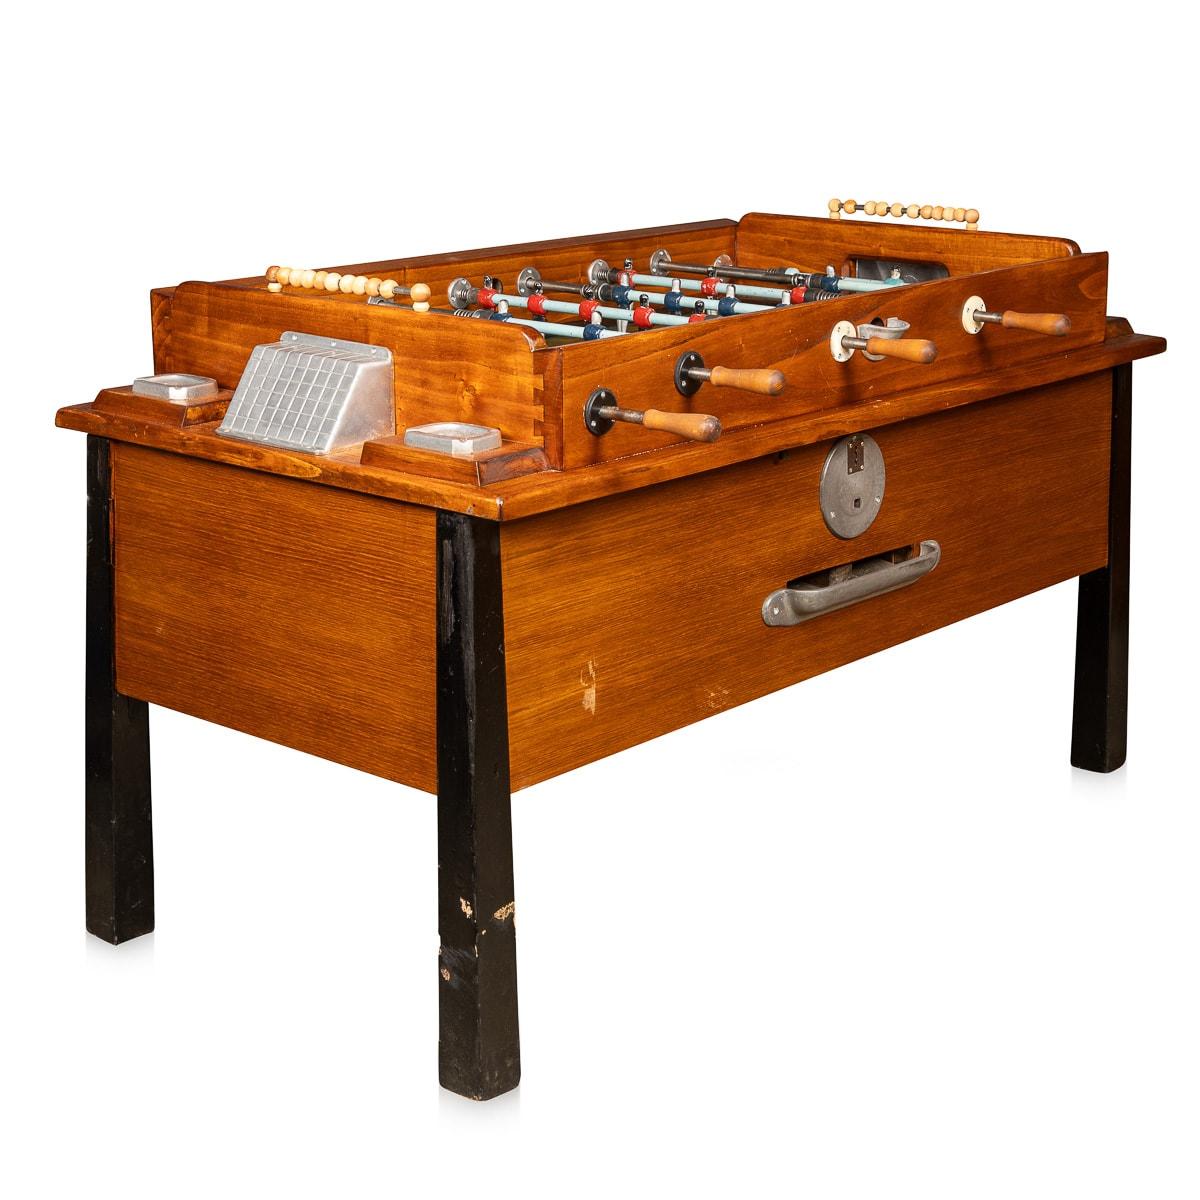 This mid-20th-century foosball table, with its captivating two-tone color scheme of black legs and a hardwood body, embodies an era when it was a centerpiece in Italy's bustling Martini bars throughout the '50s. Amidst the clinking of glasses and